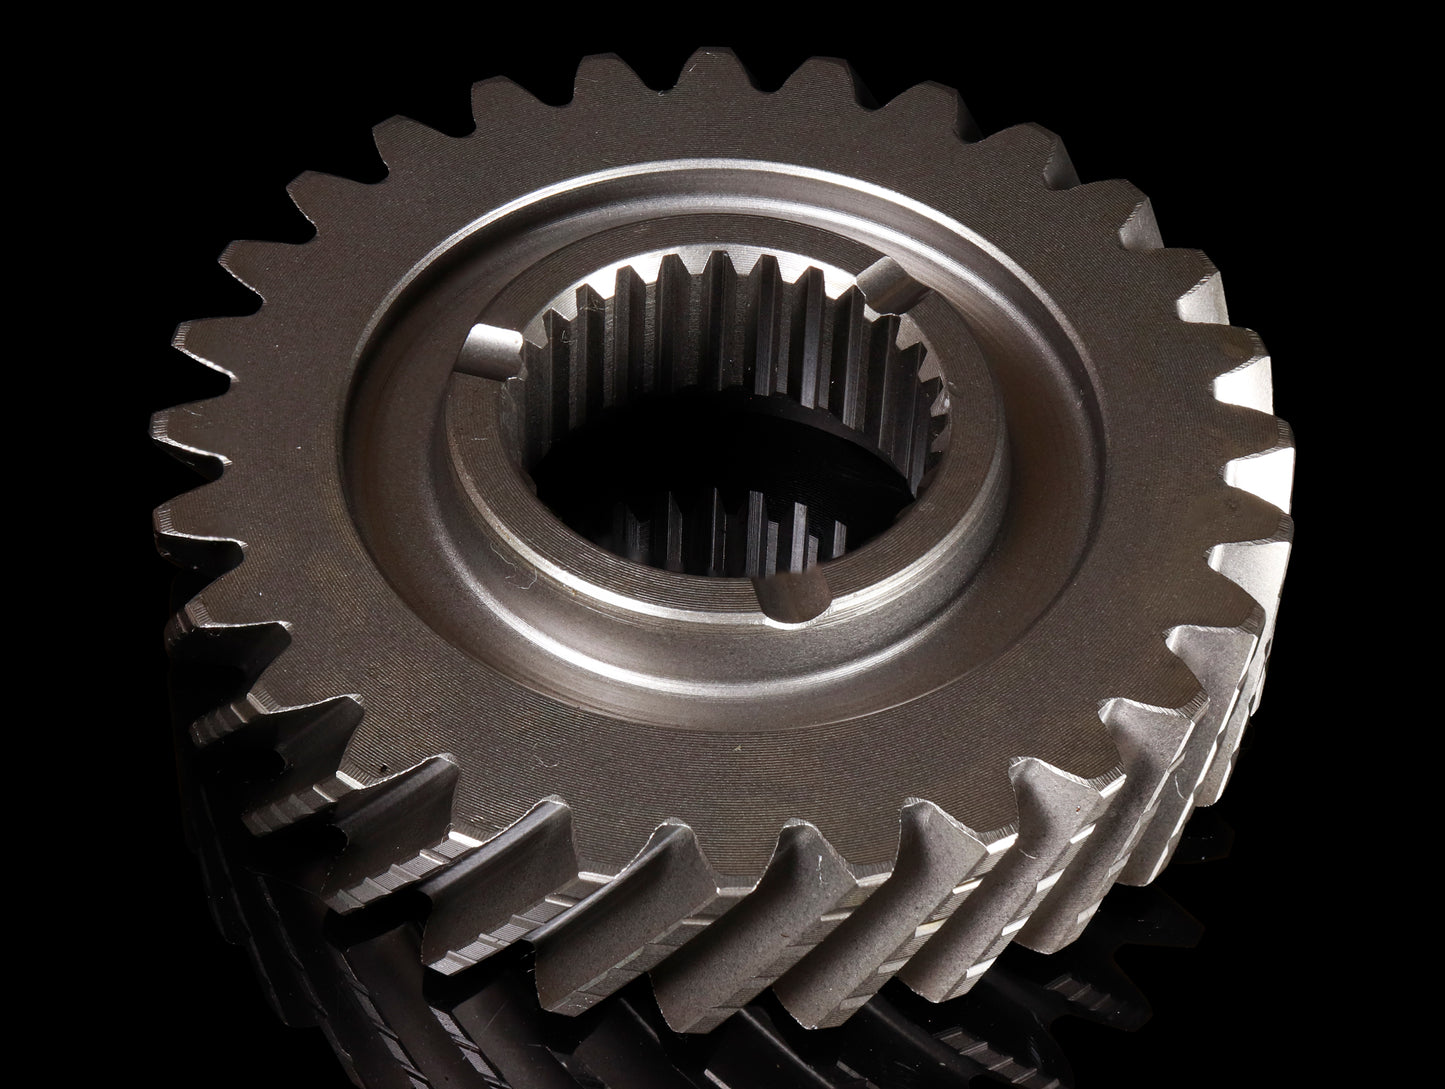 Gear-X Close Ratio 5th Gear Set (OEM Replacement) - B-series